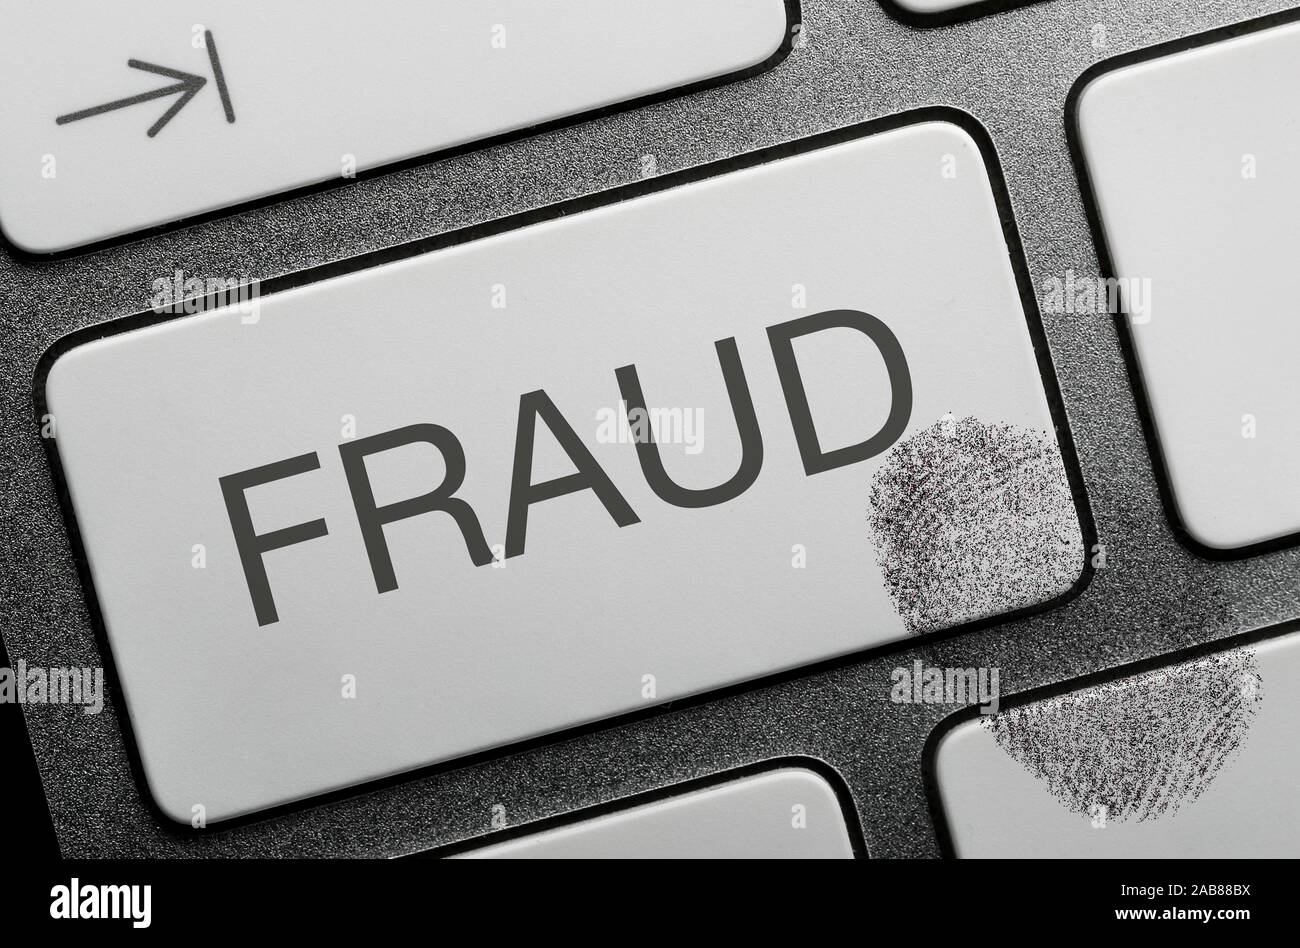 Concept internet crime images, fraud Stock Photo